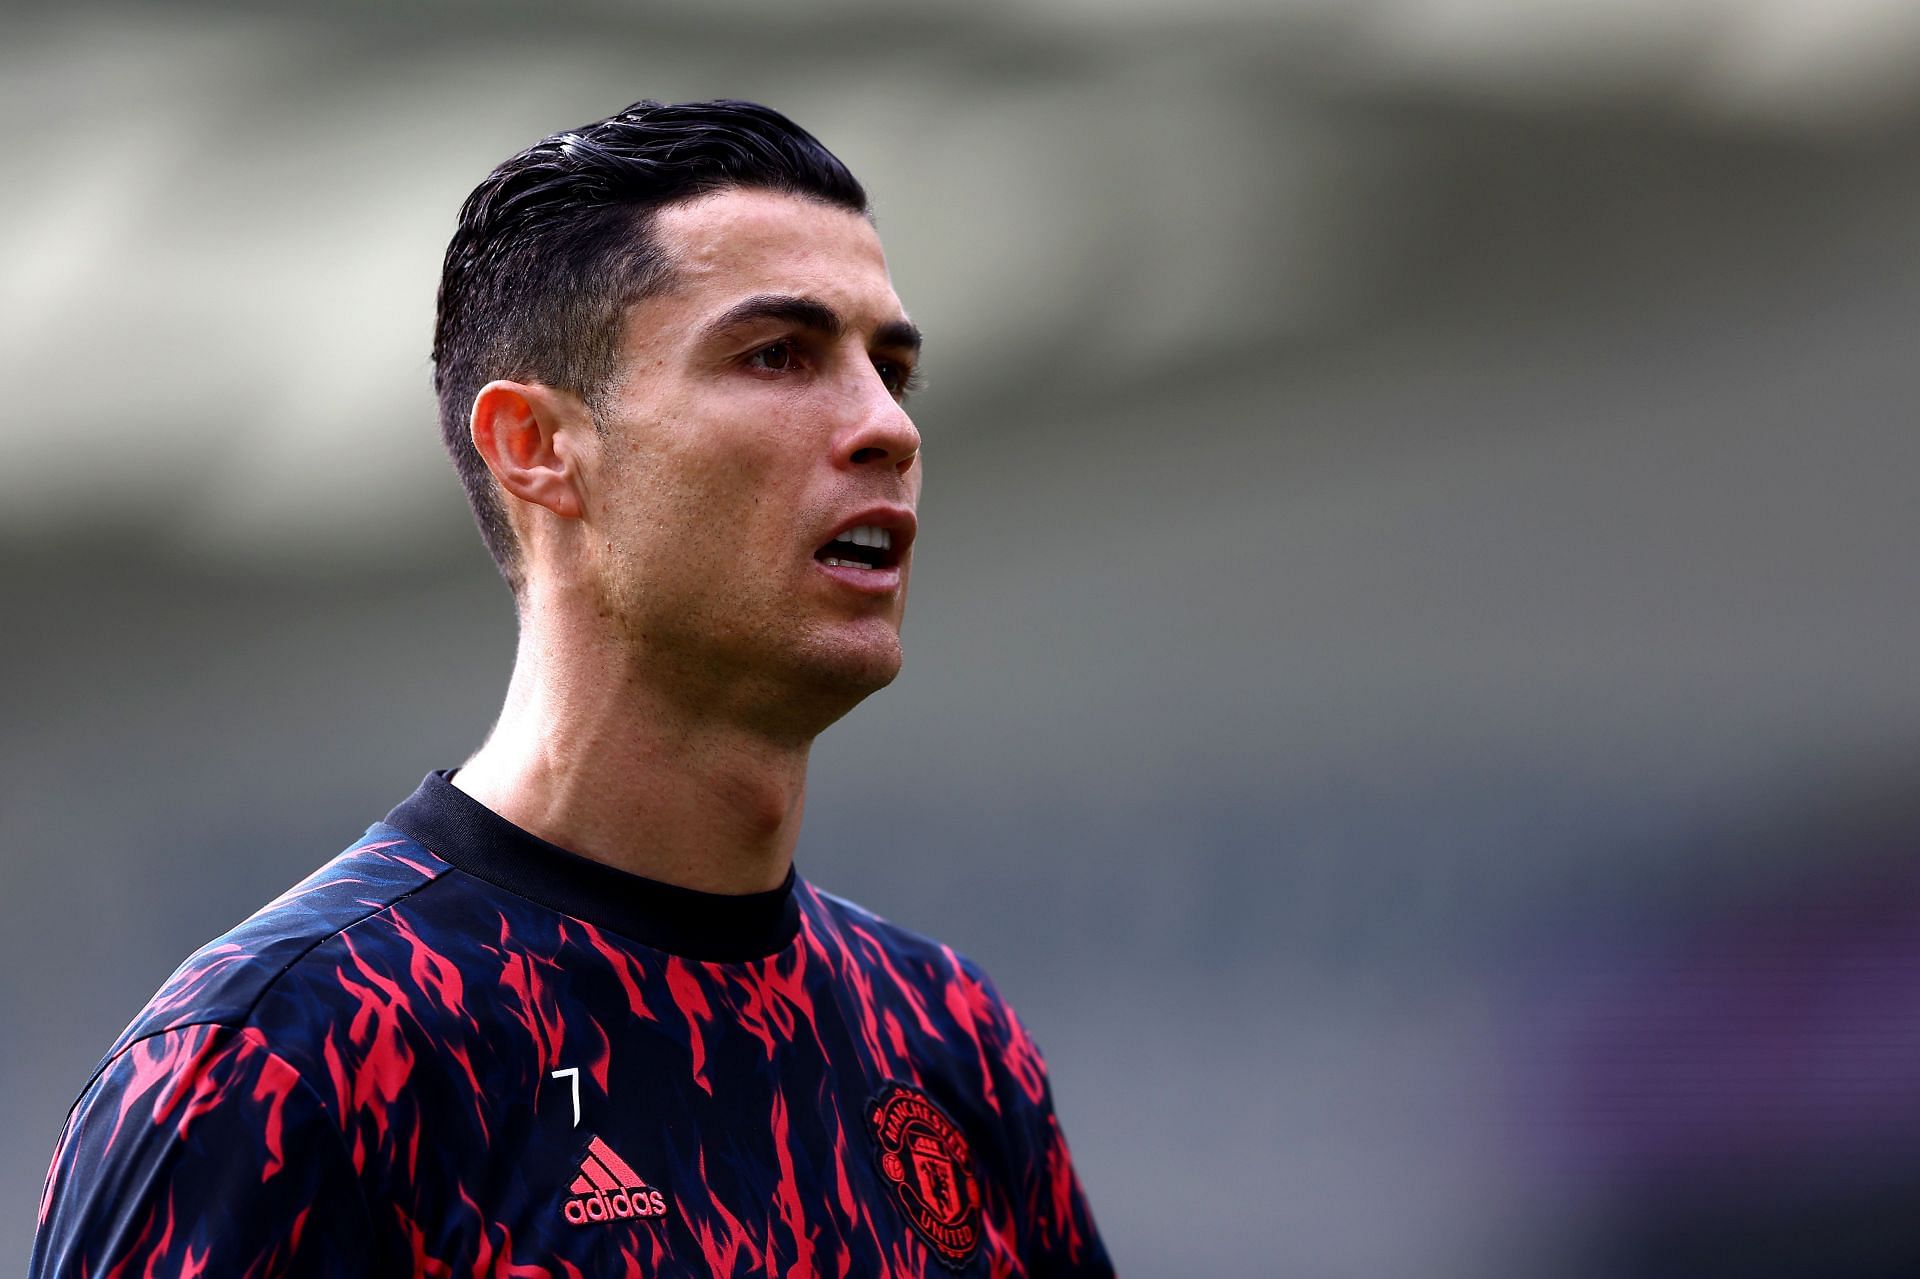 Cristiano Ronaldo has hinted that he could remain at Old Trafford next summer.